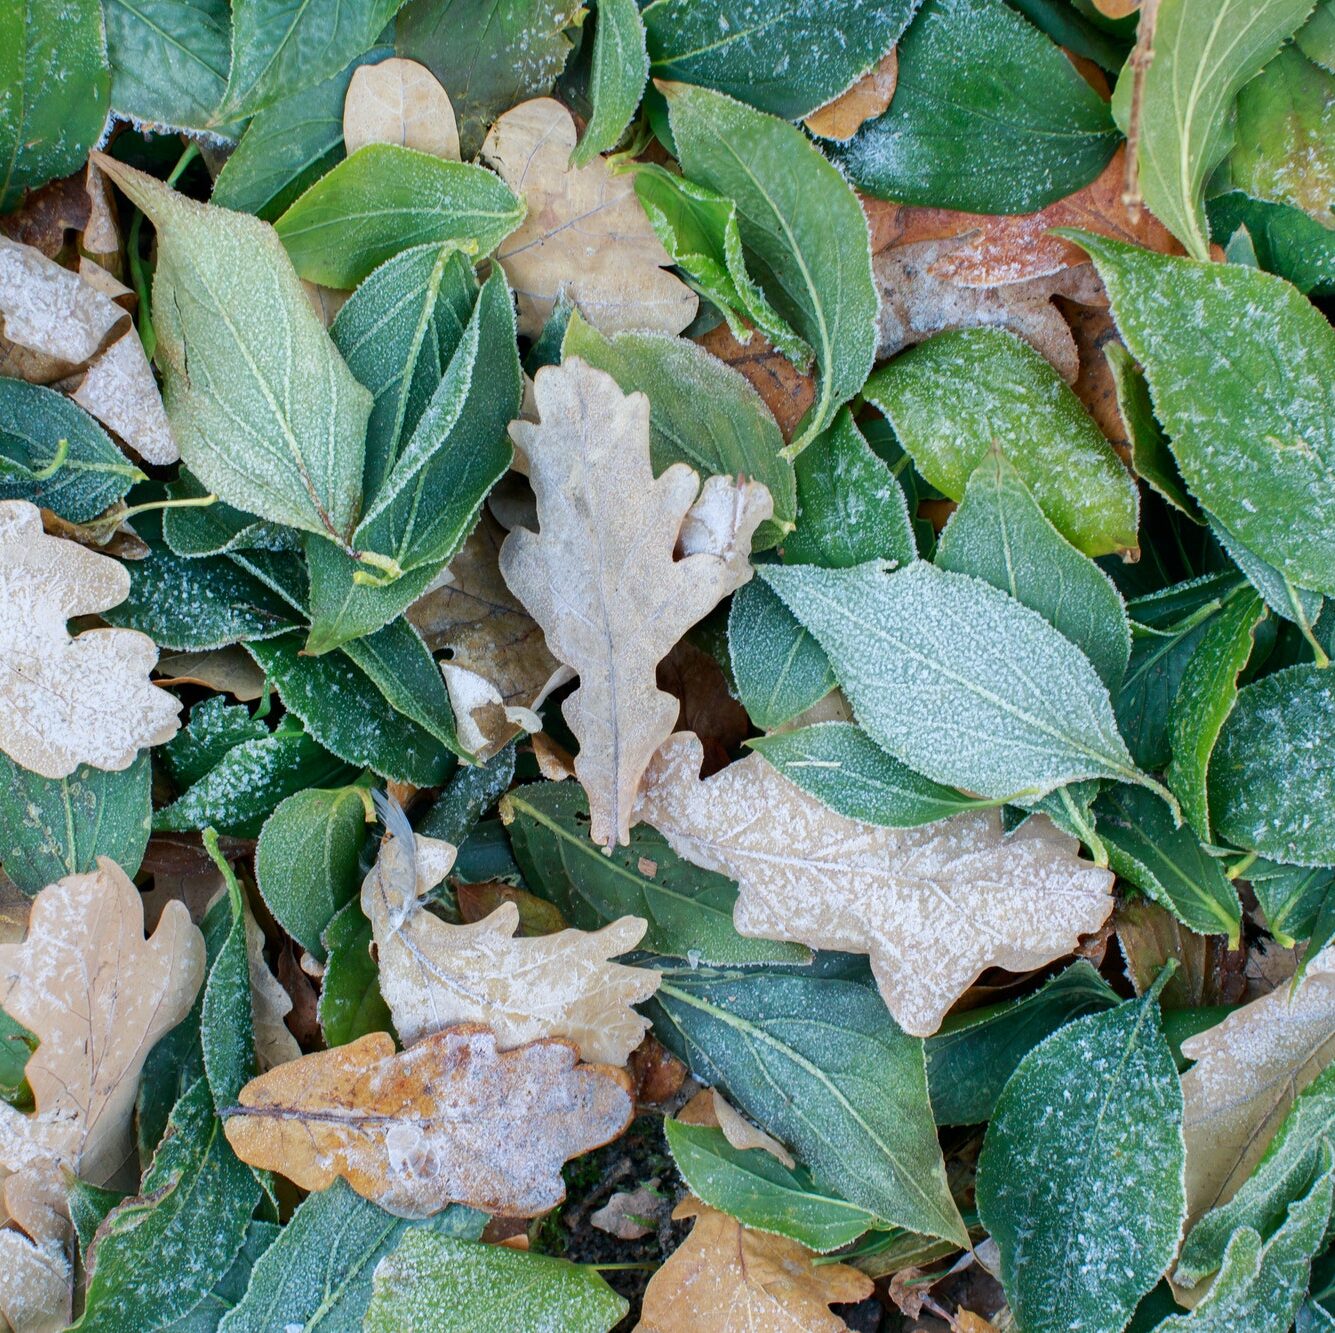 Green fallen leaves covered with ice lying on ground